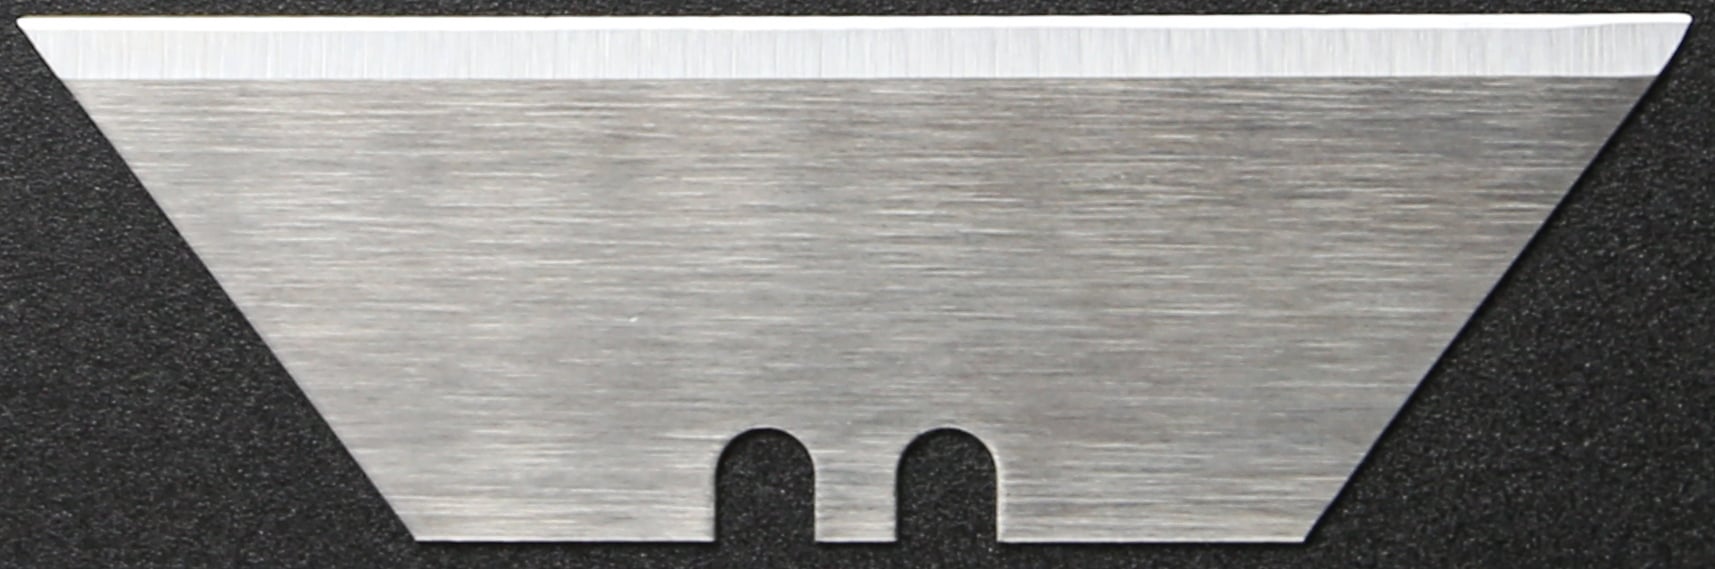 utility blade with 2 notches